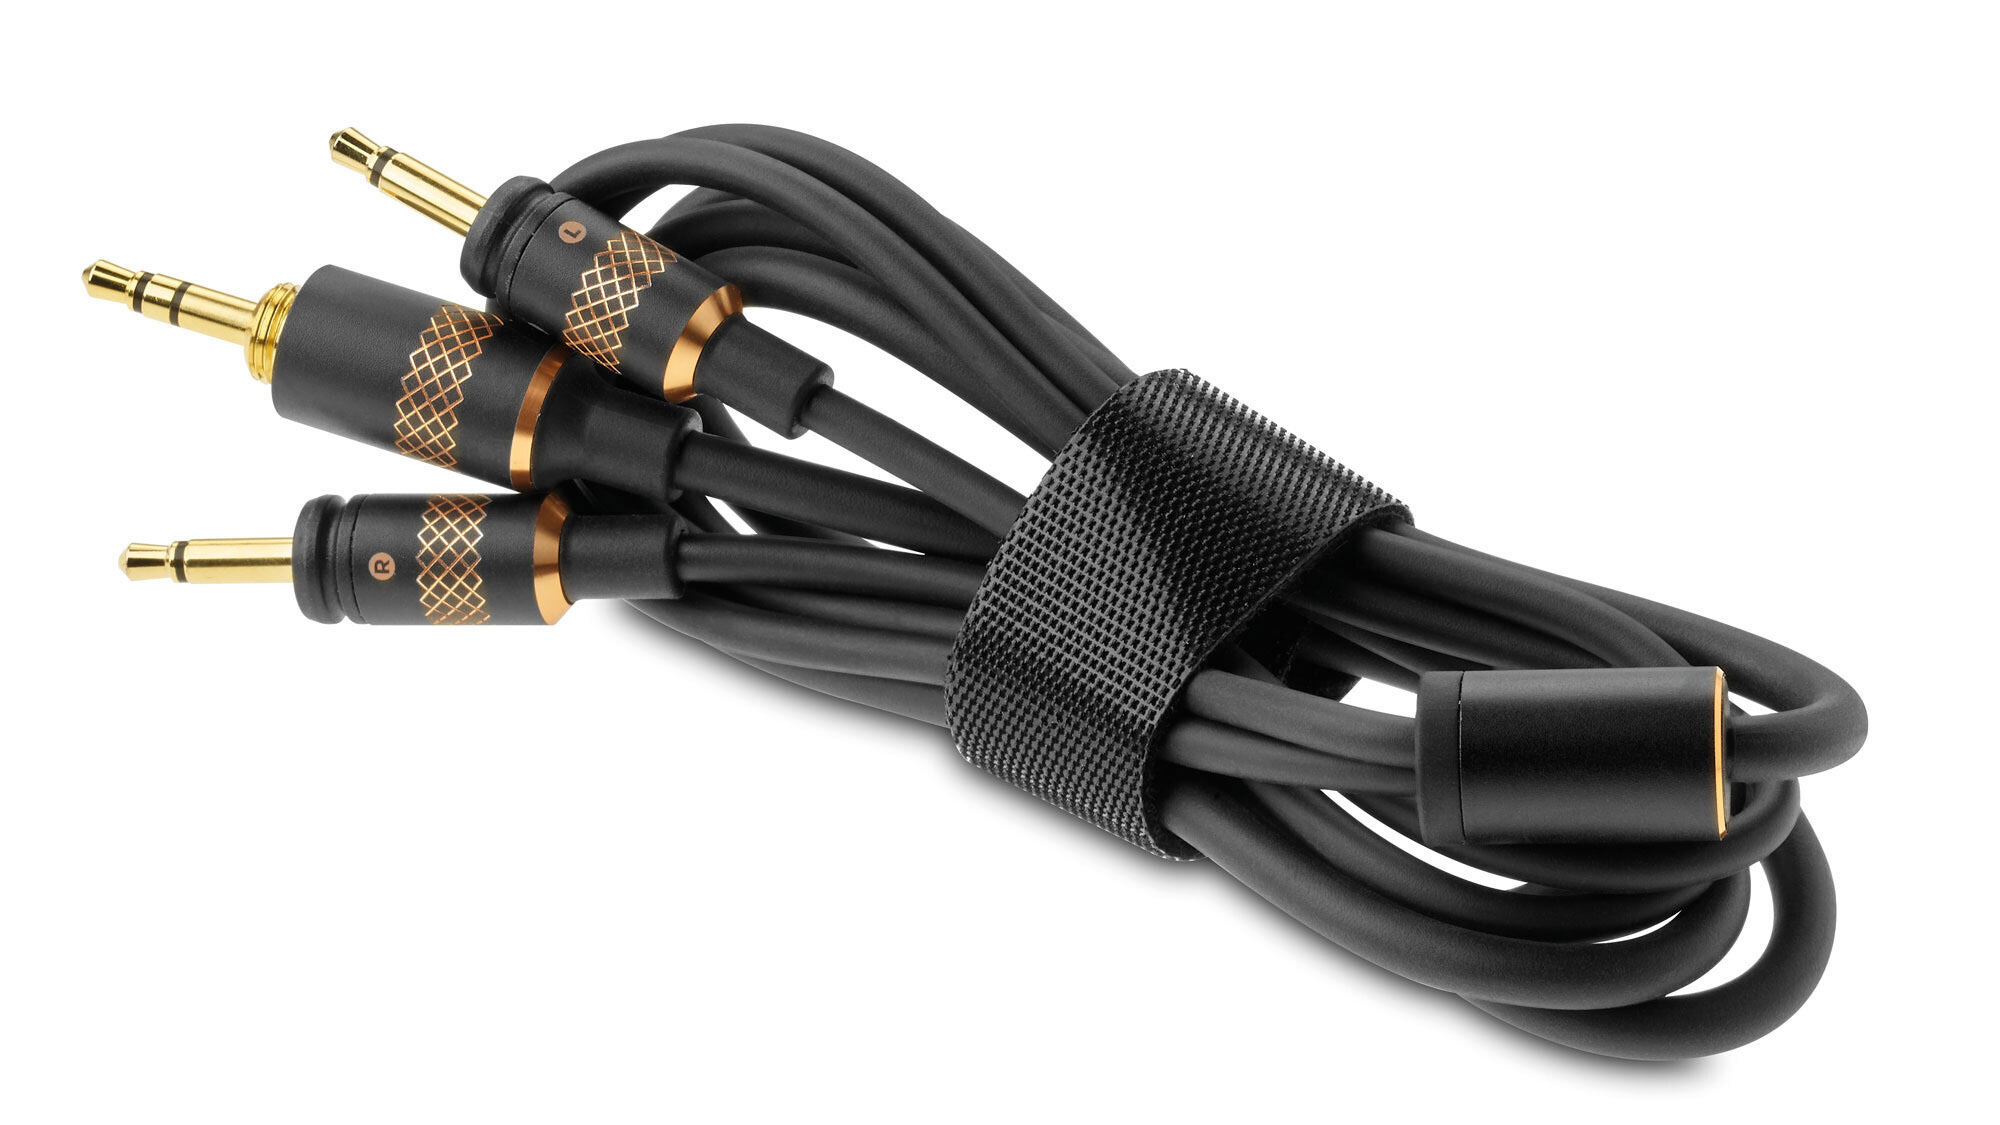 Focal Radiance cable